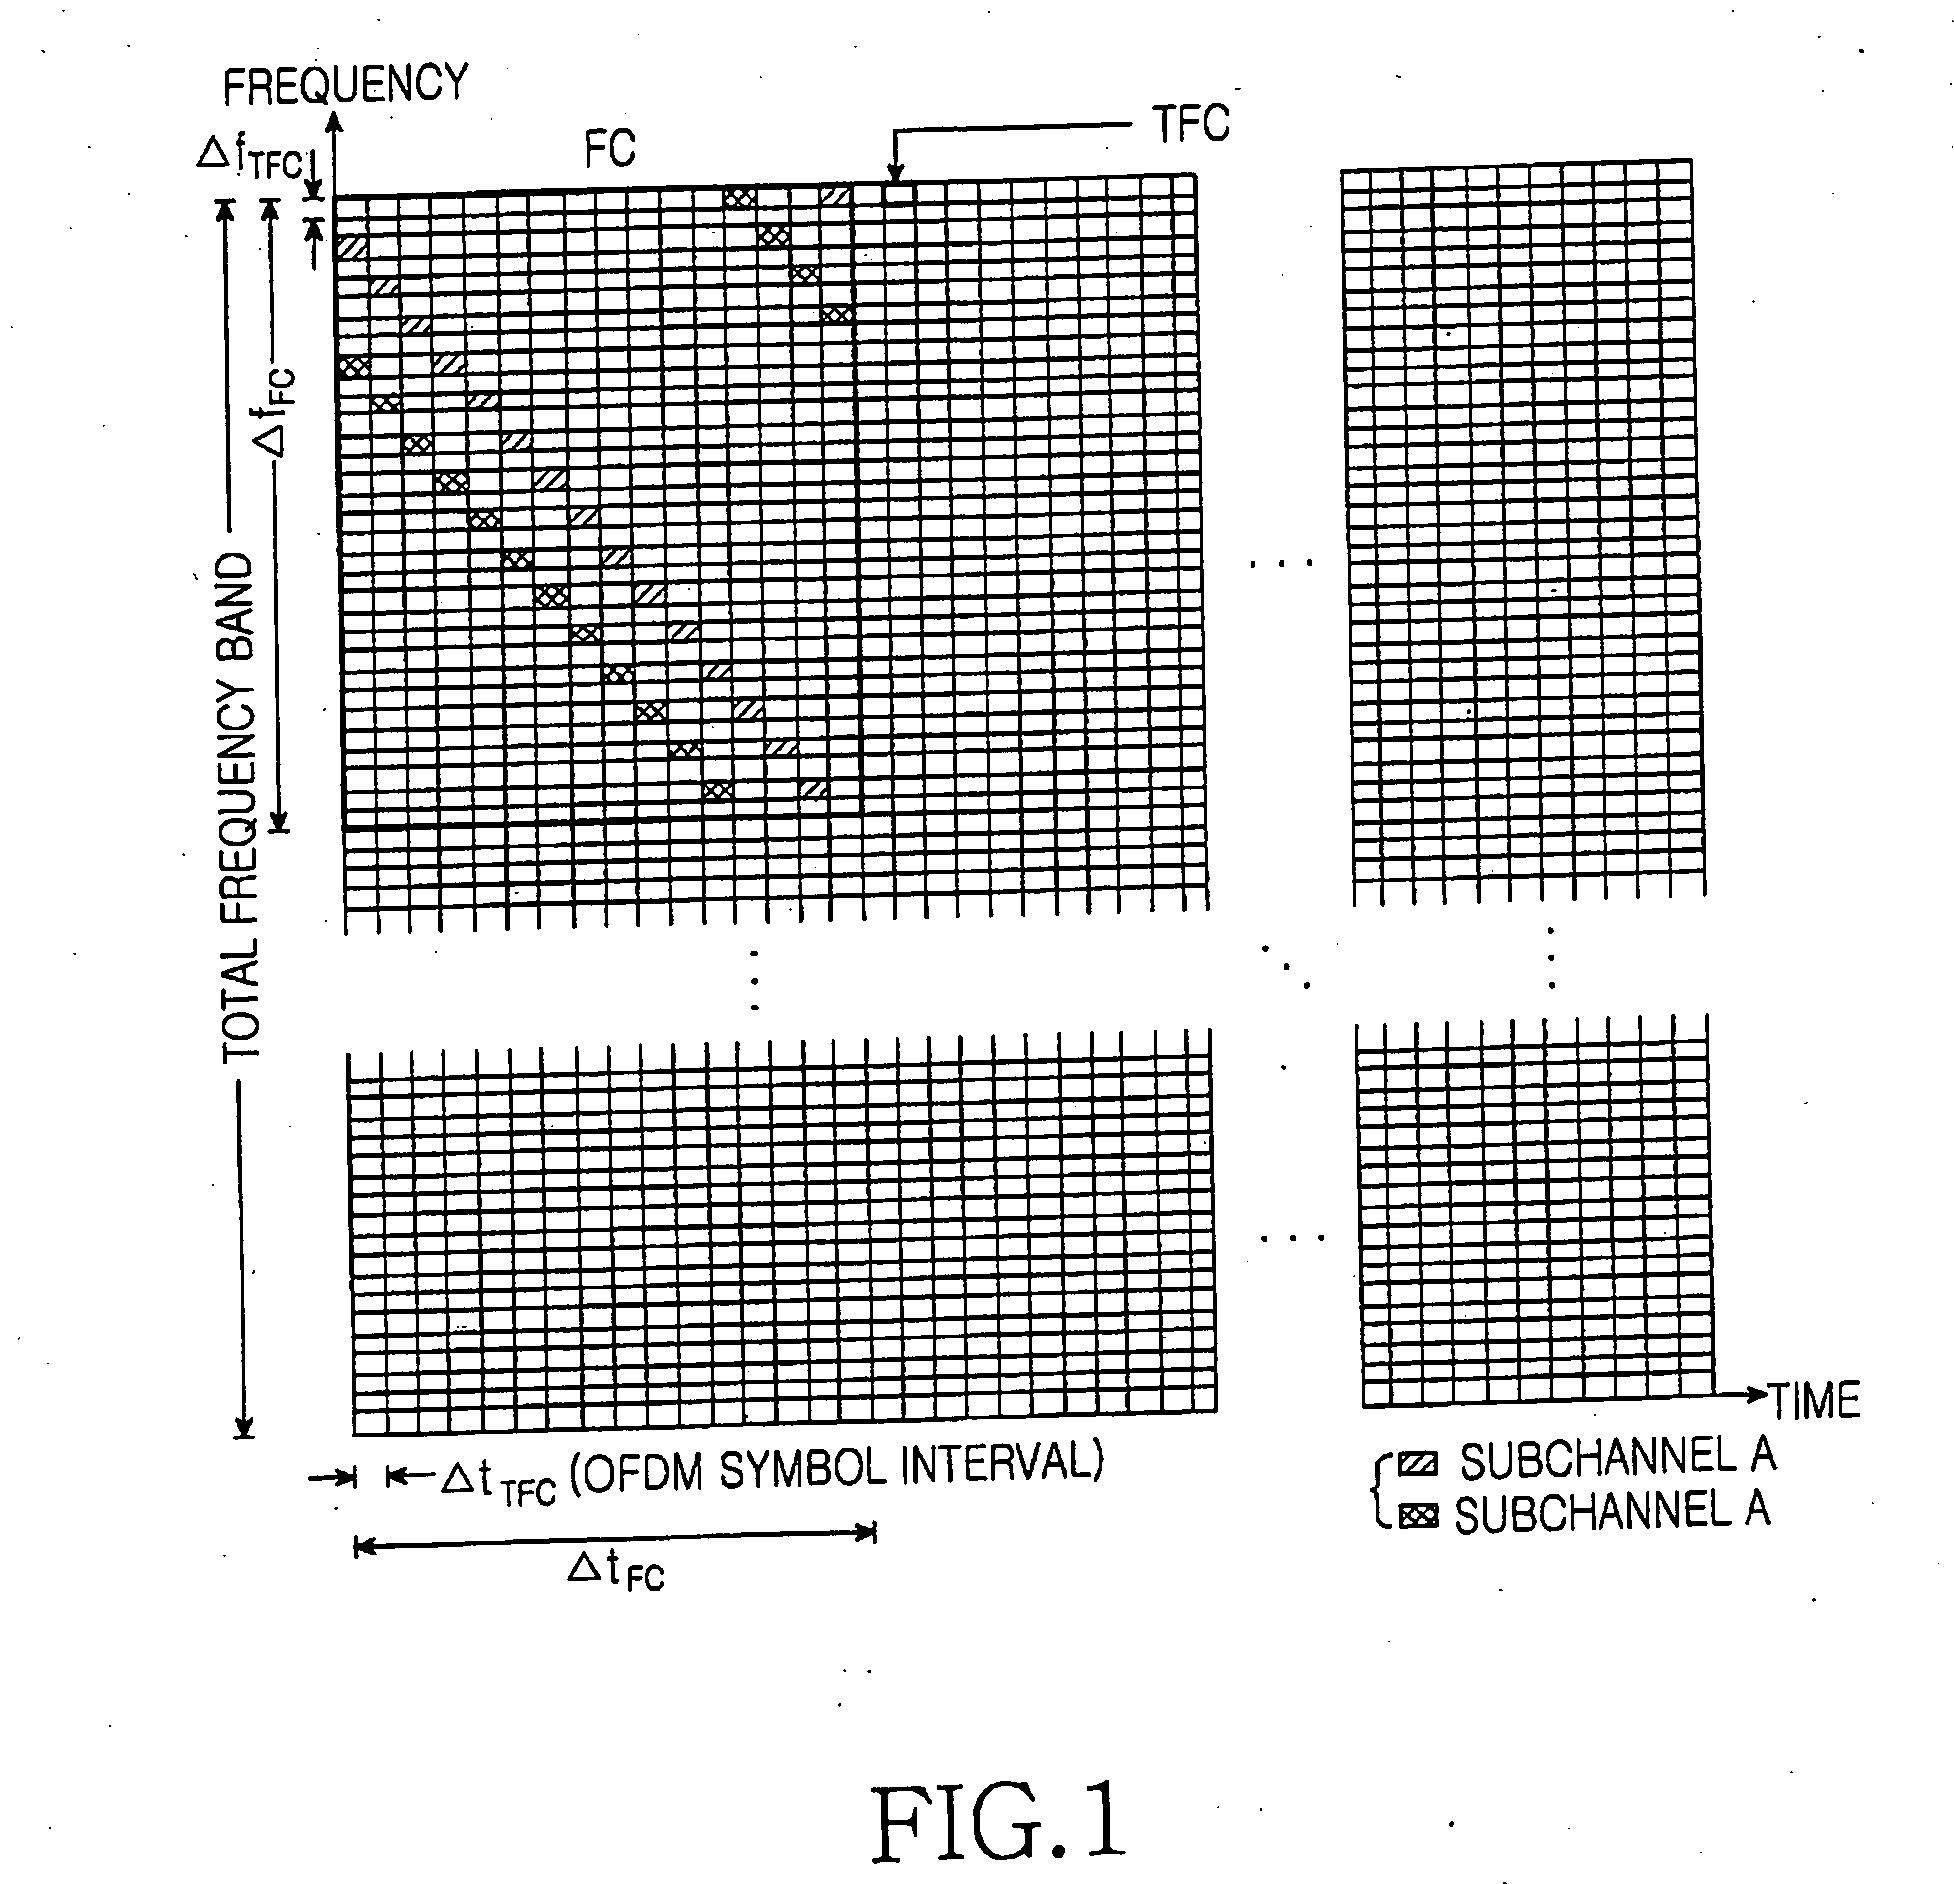 Cell search apparatus and method in a mobile communication system using multiple access scheme